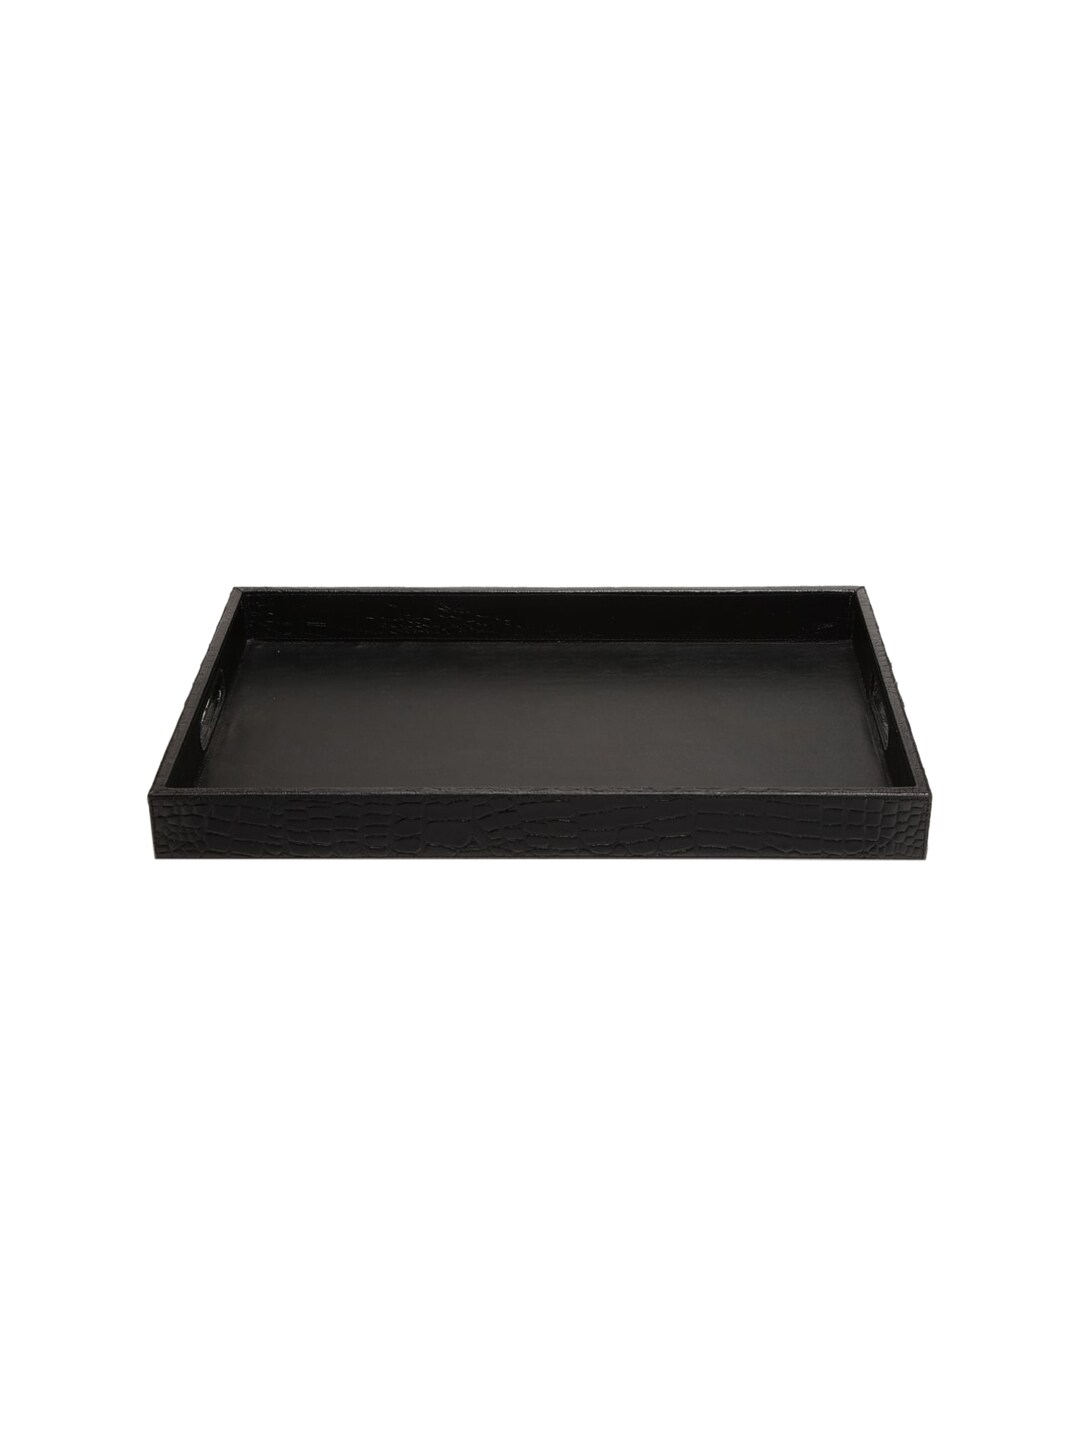 IMUR Black Textured Genuine Leather Tray Price in India